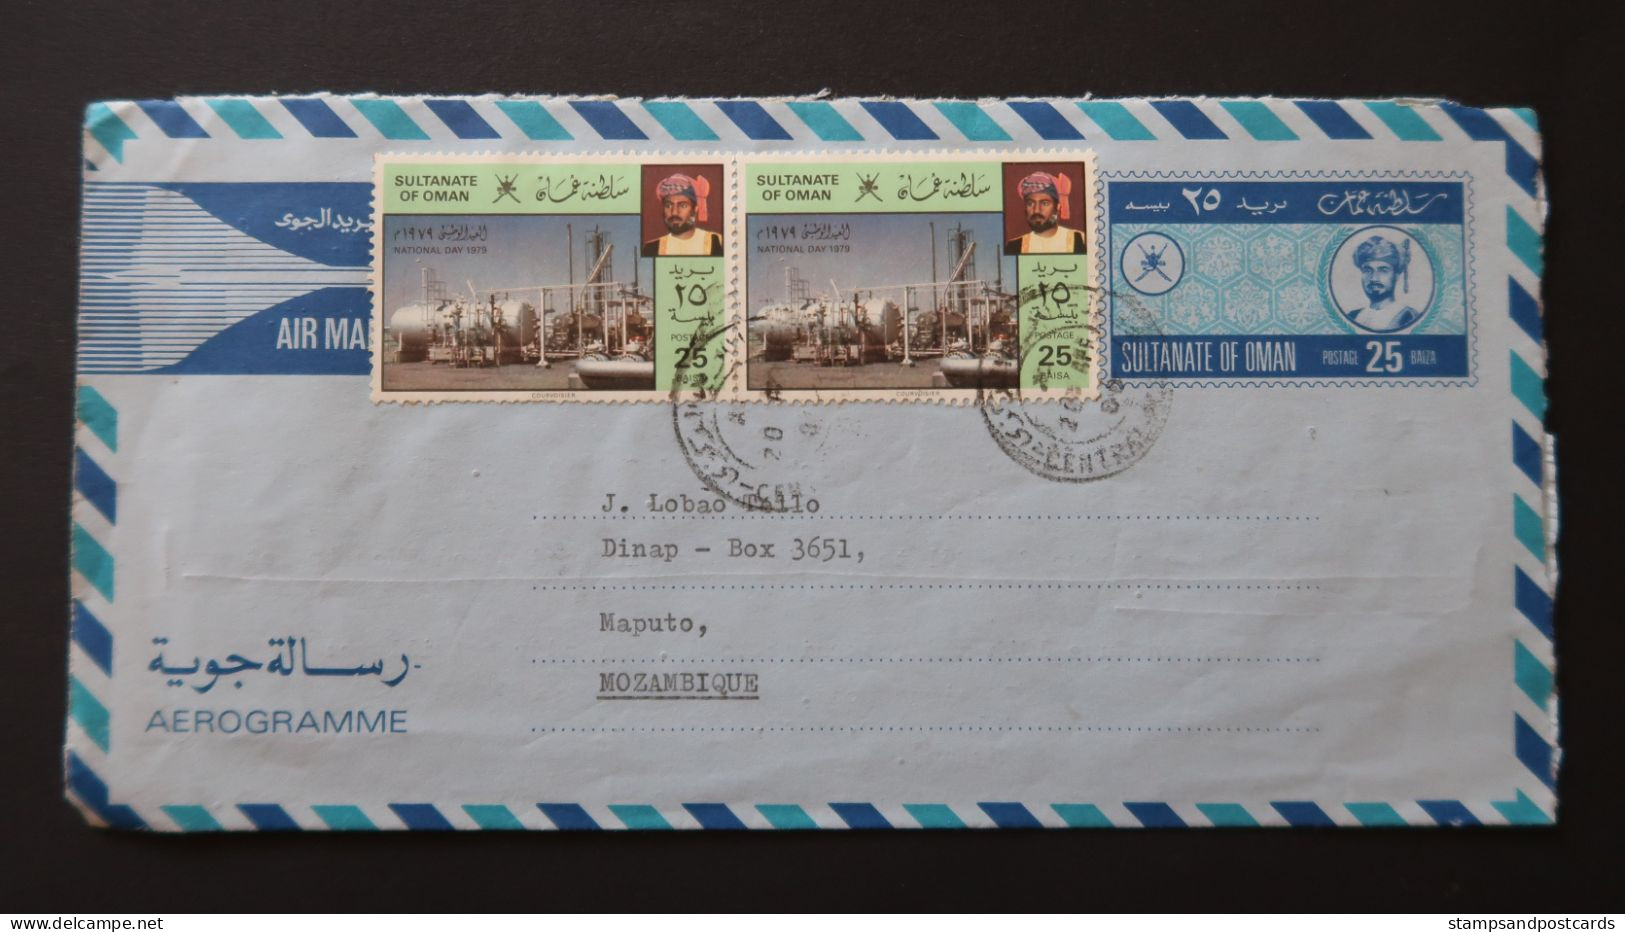 Oman Entier Postal Aerogramme Voyagé Au Mozambique 1980 Sultanate Of Oman Air Letter Stationery Postally Used - Oman